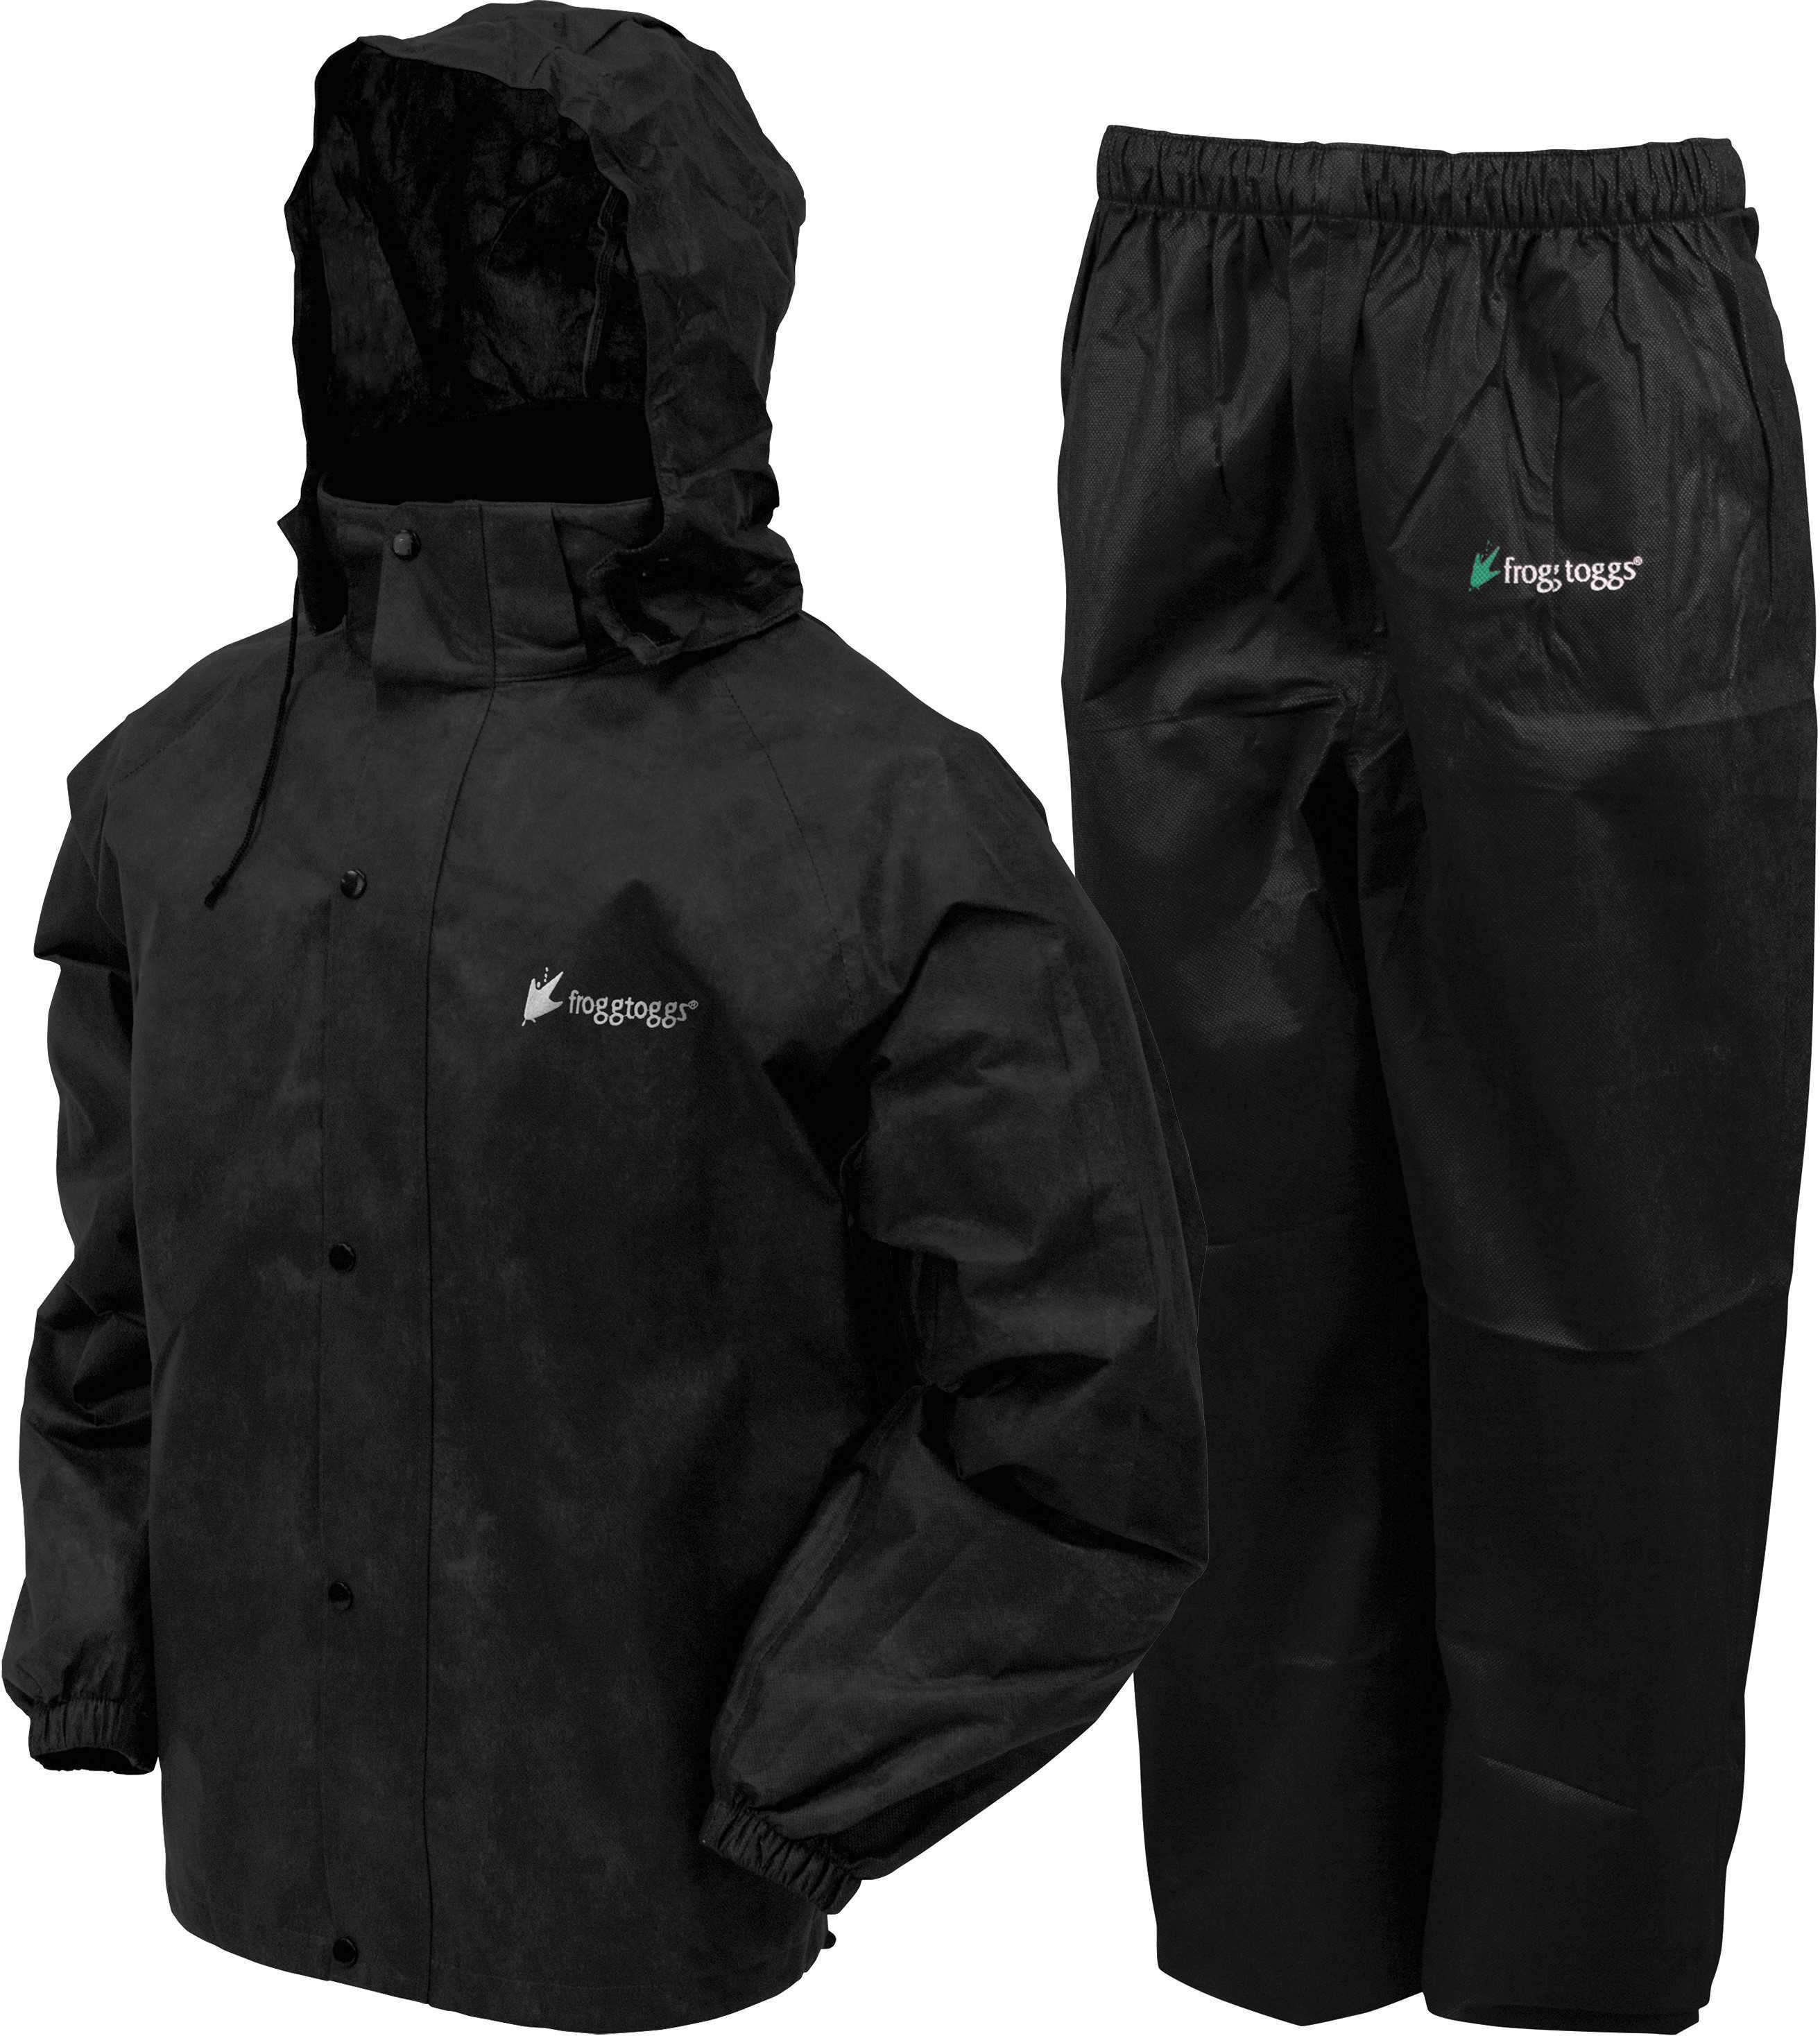 Frogg Toggs All Sport Rain Suit Size XL, Black